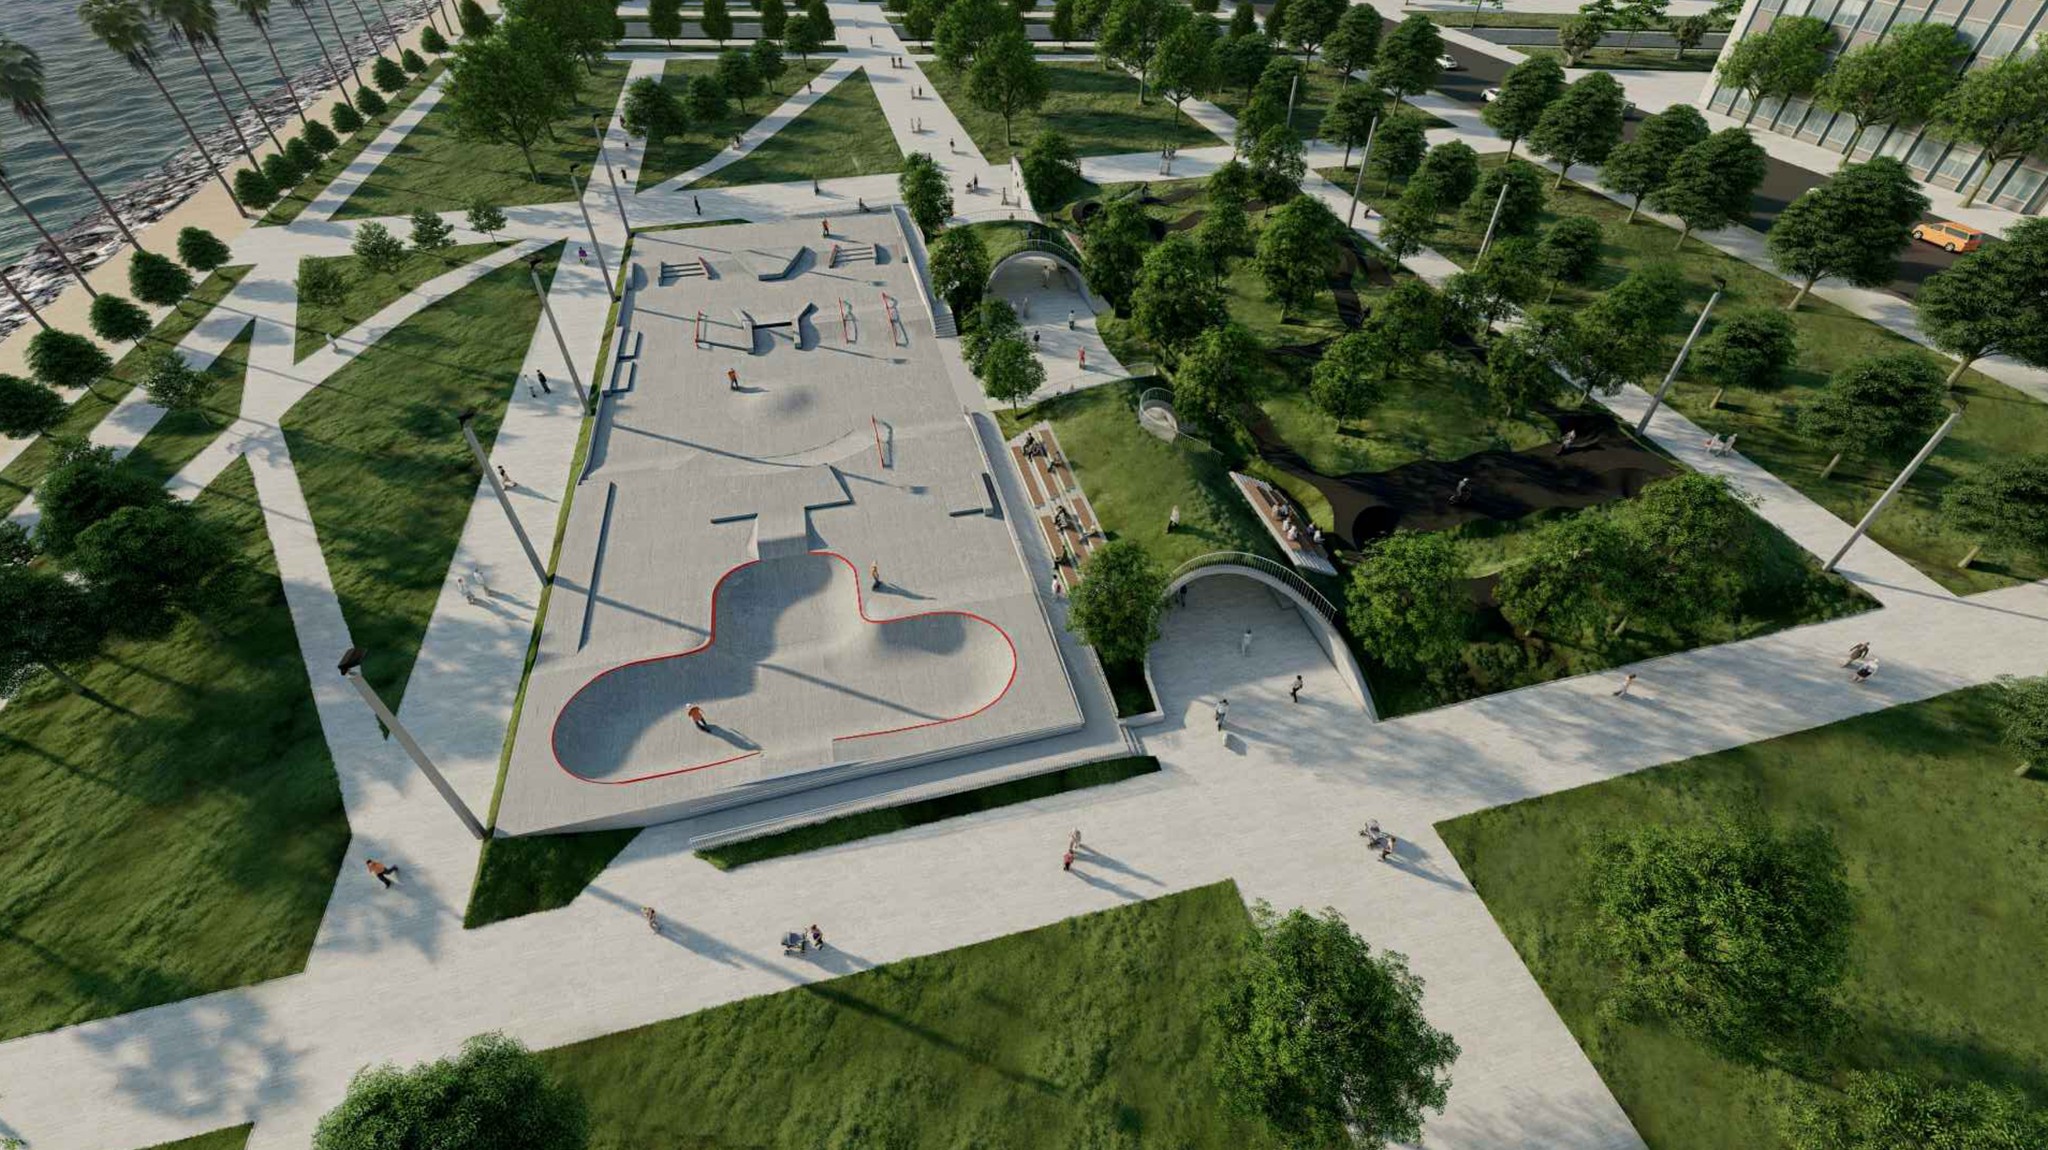 One of the largest skate parks in Georgia will be built on Batumi Boulevard